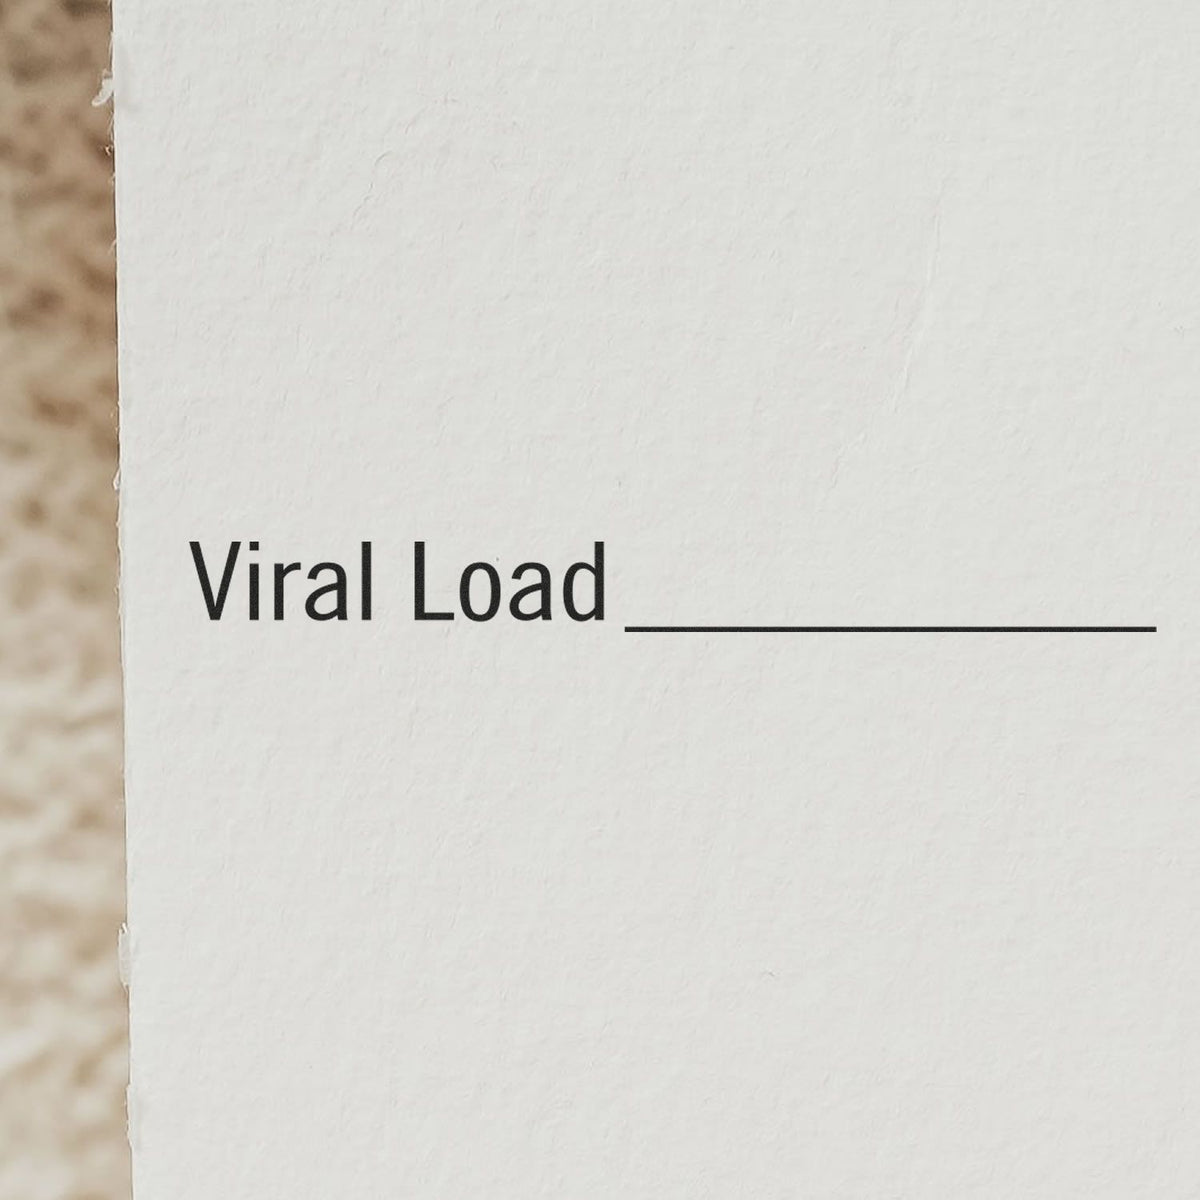 Large Viral Load Rubber Stamp Lifestyle Photo